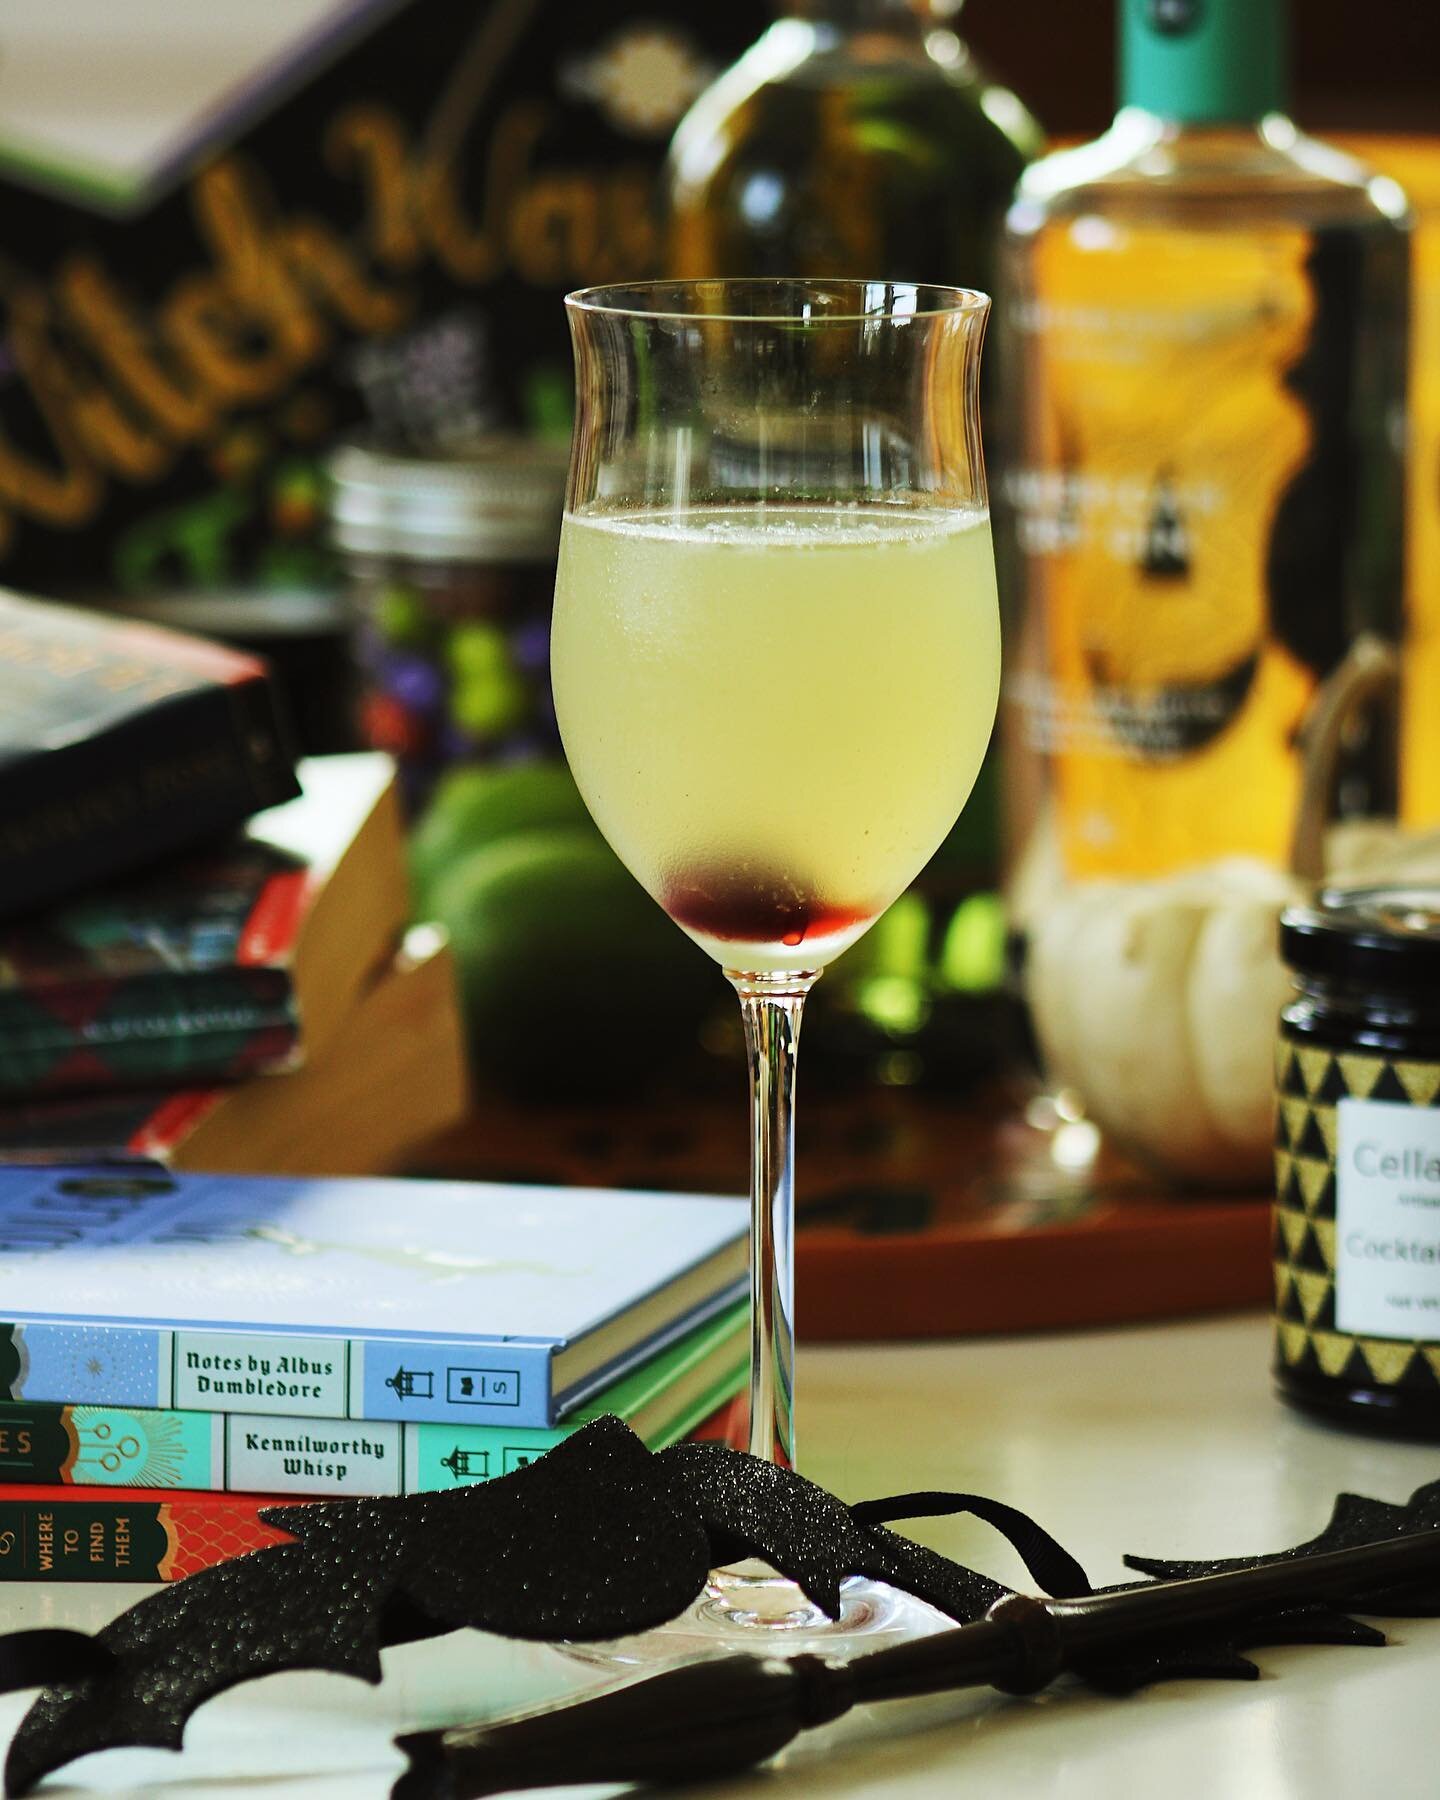 Hosting a Halloween Party this weekend? Well we&rsquo;ve got the perfect drink to share with your guests to elevate the evening! This Harry Potter inspired drink is green in hue and gets garnished with a bloody looking Cellar Door Artisan Preserves C